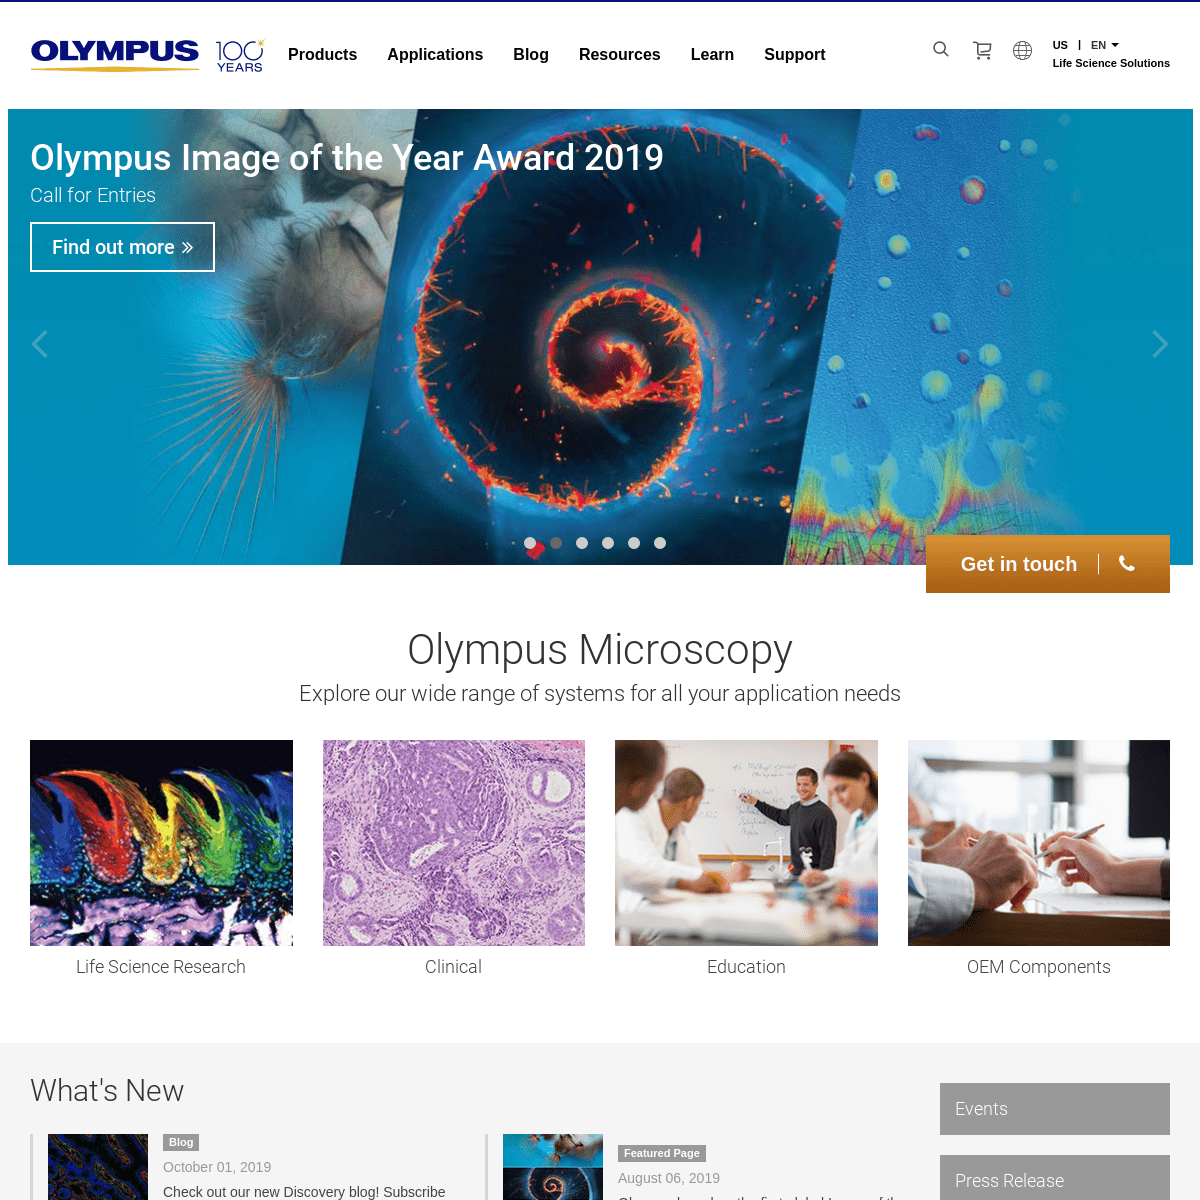 Olympus - Life Science Solutions